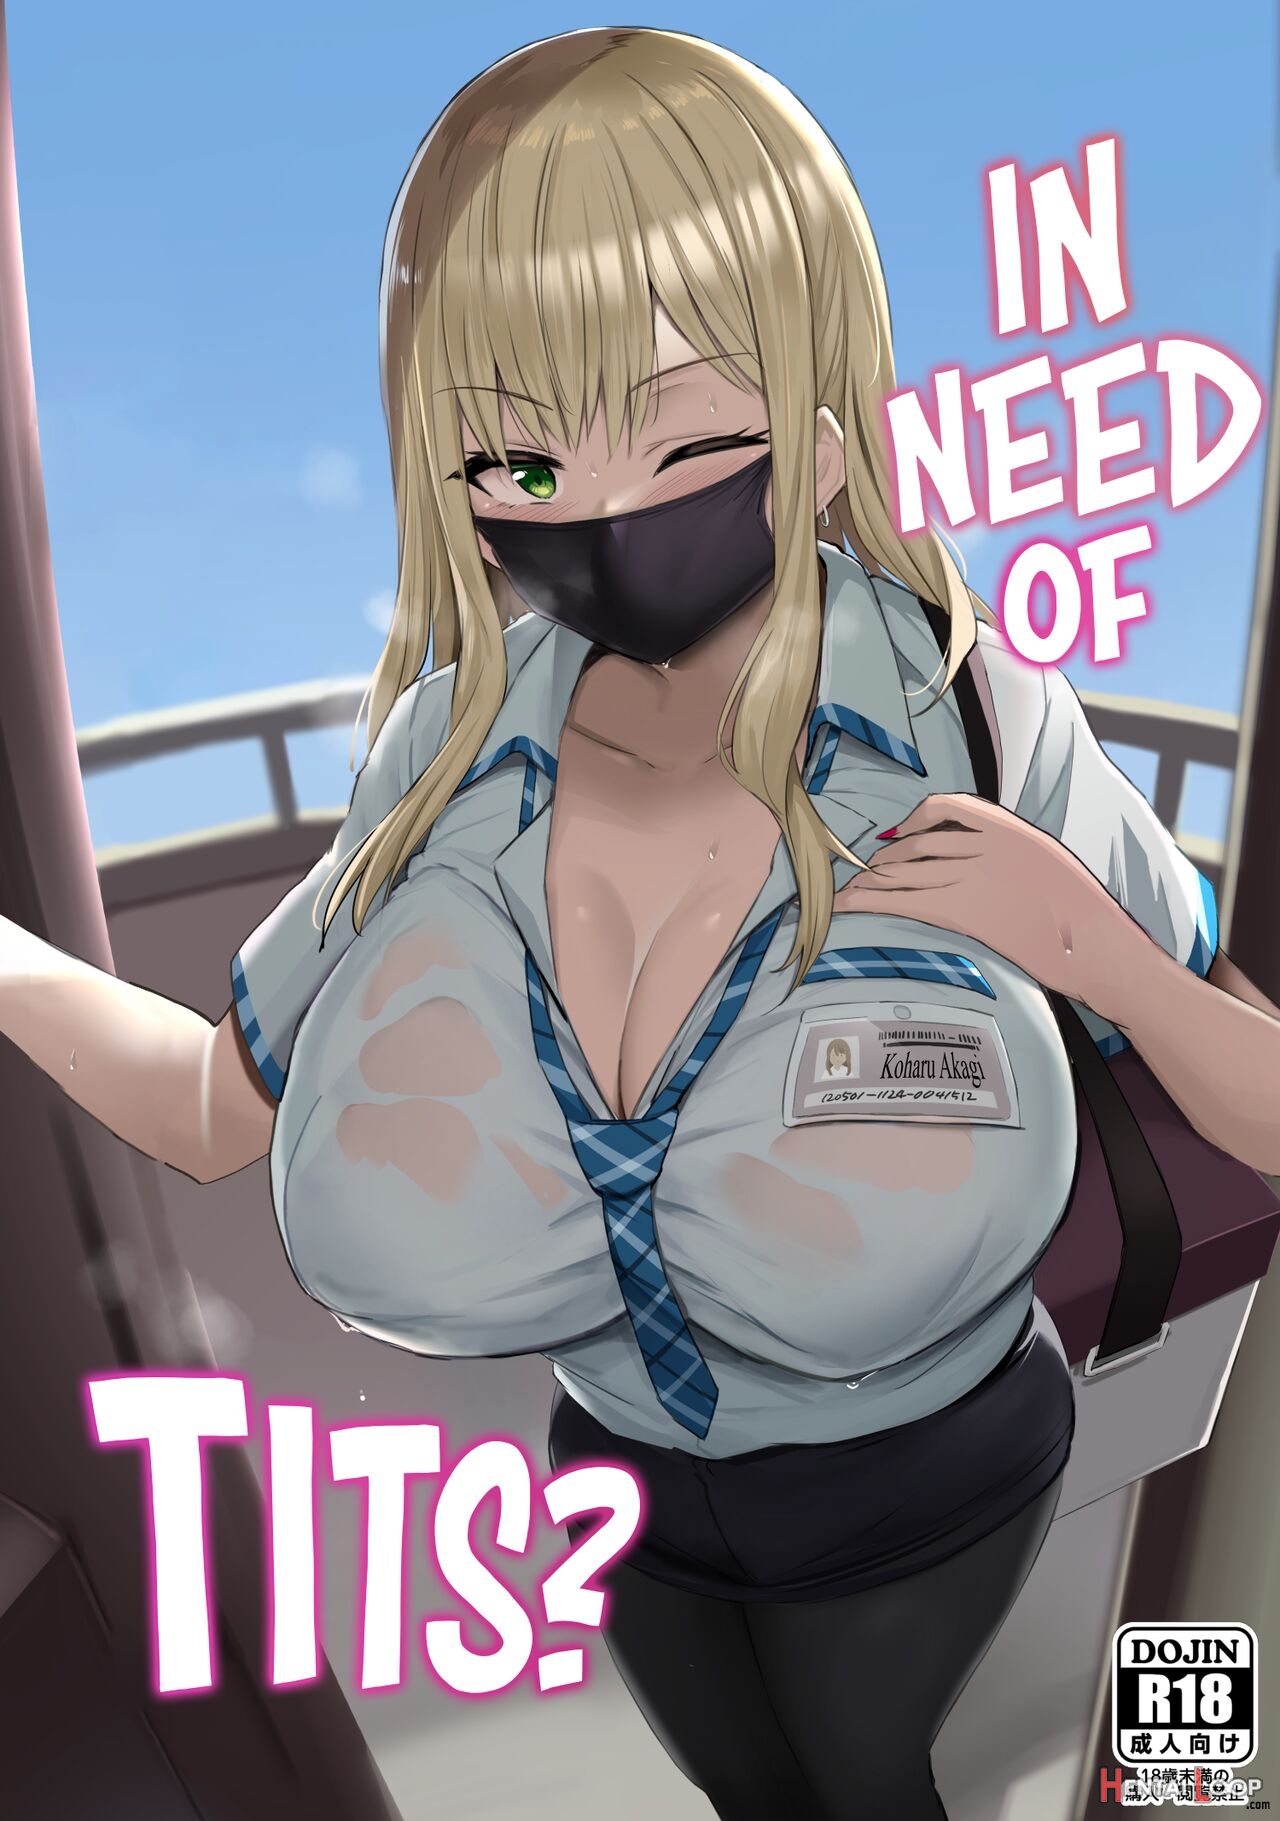 In Need Of Tits? page 1